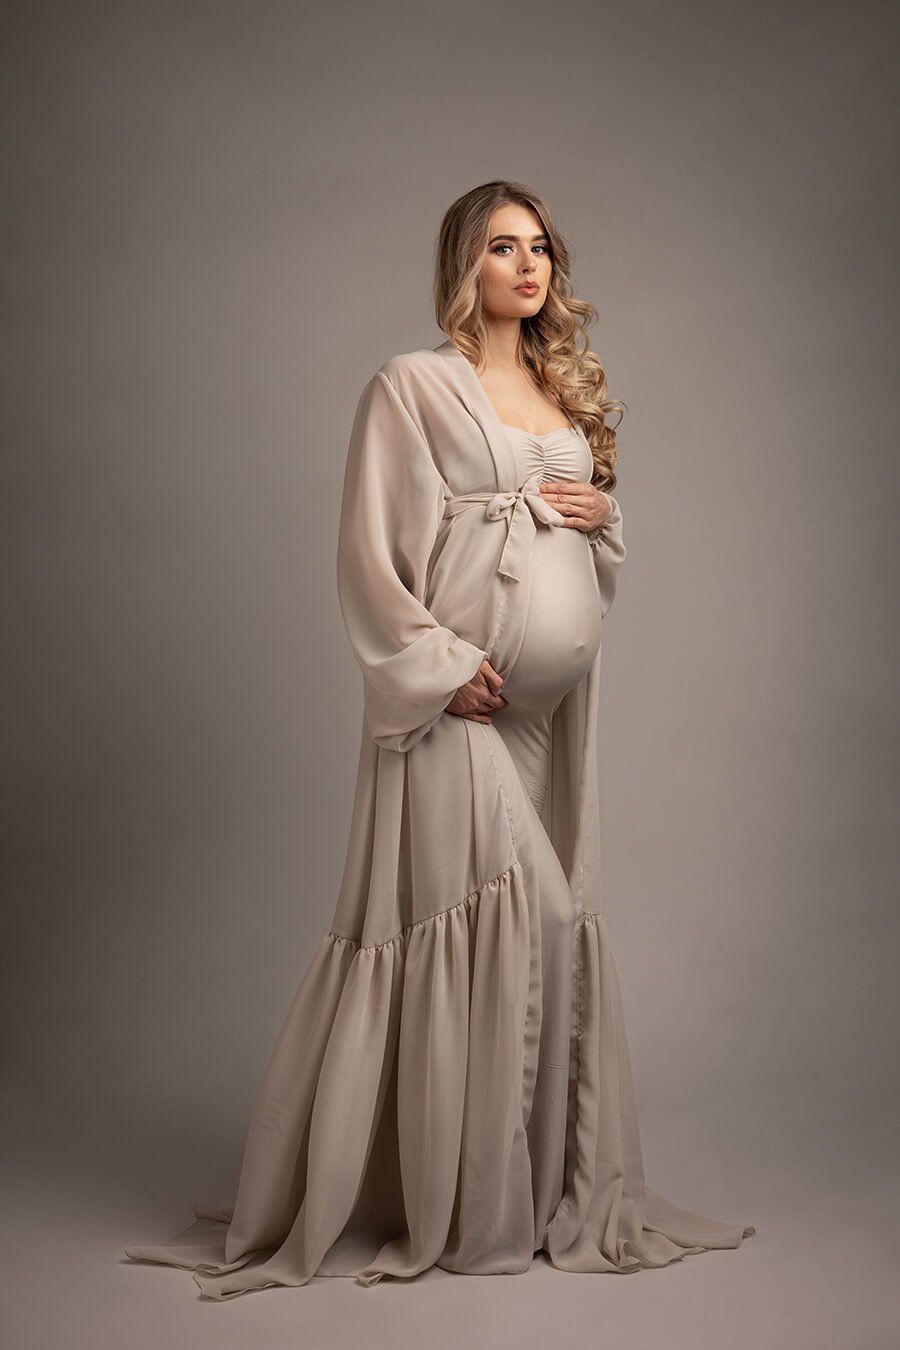 pregnant blond model poses in a studio holding her baby bump and looking to the camera. she is wearing a long chiffon robe in sand color and a matching long tight dress underneath. 